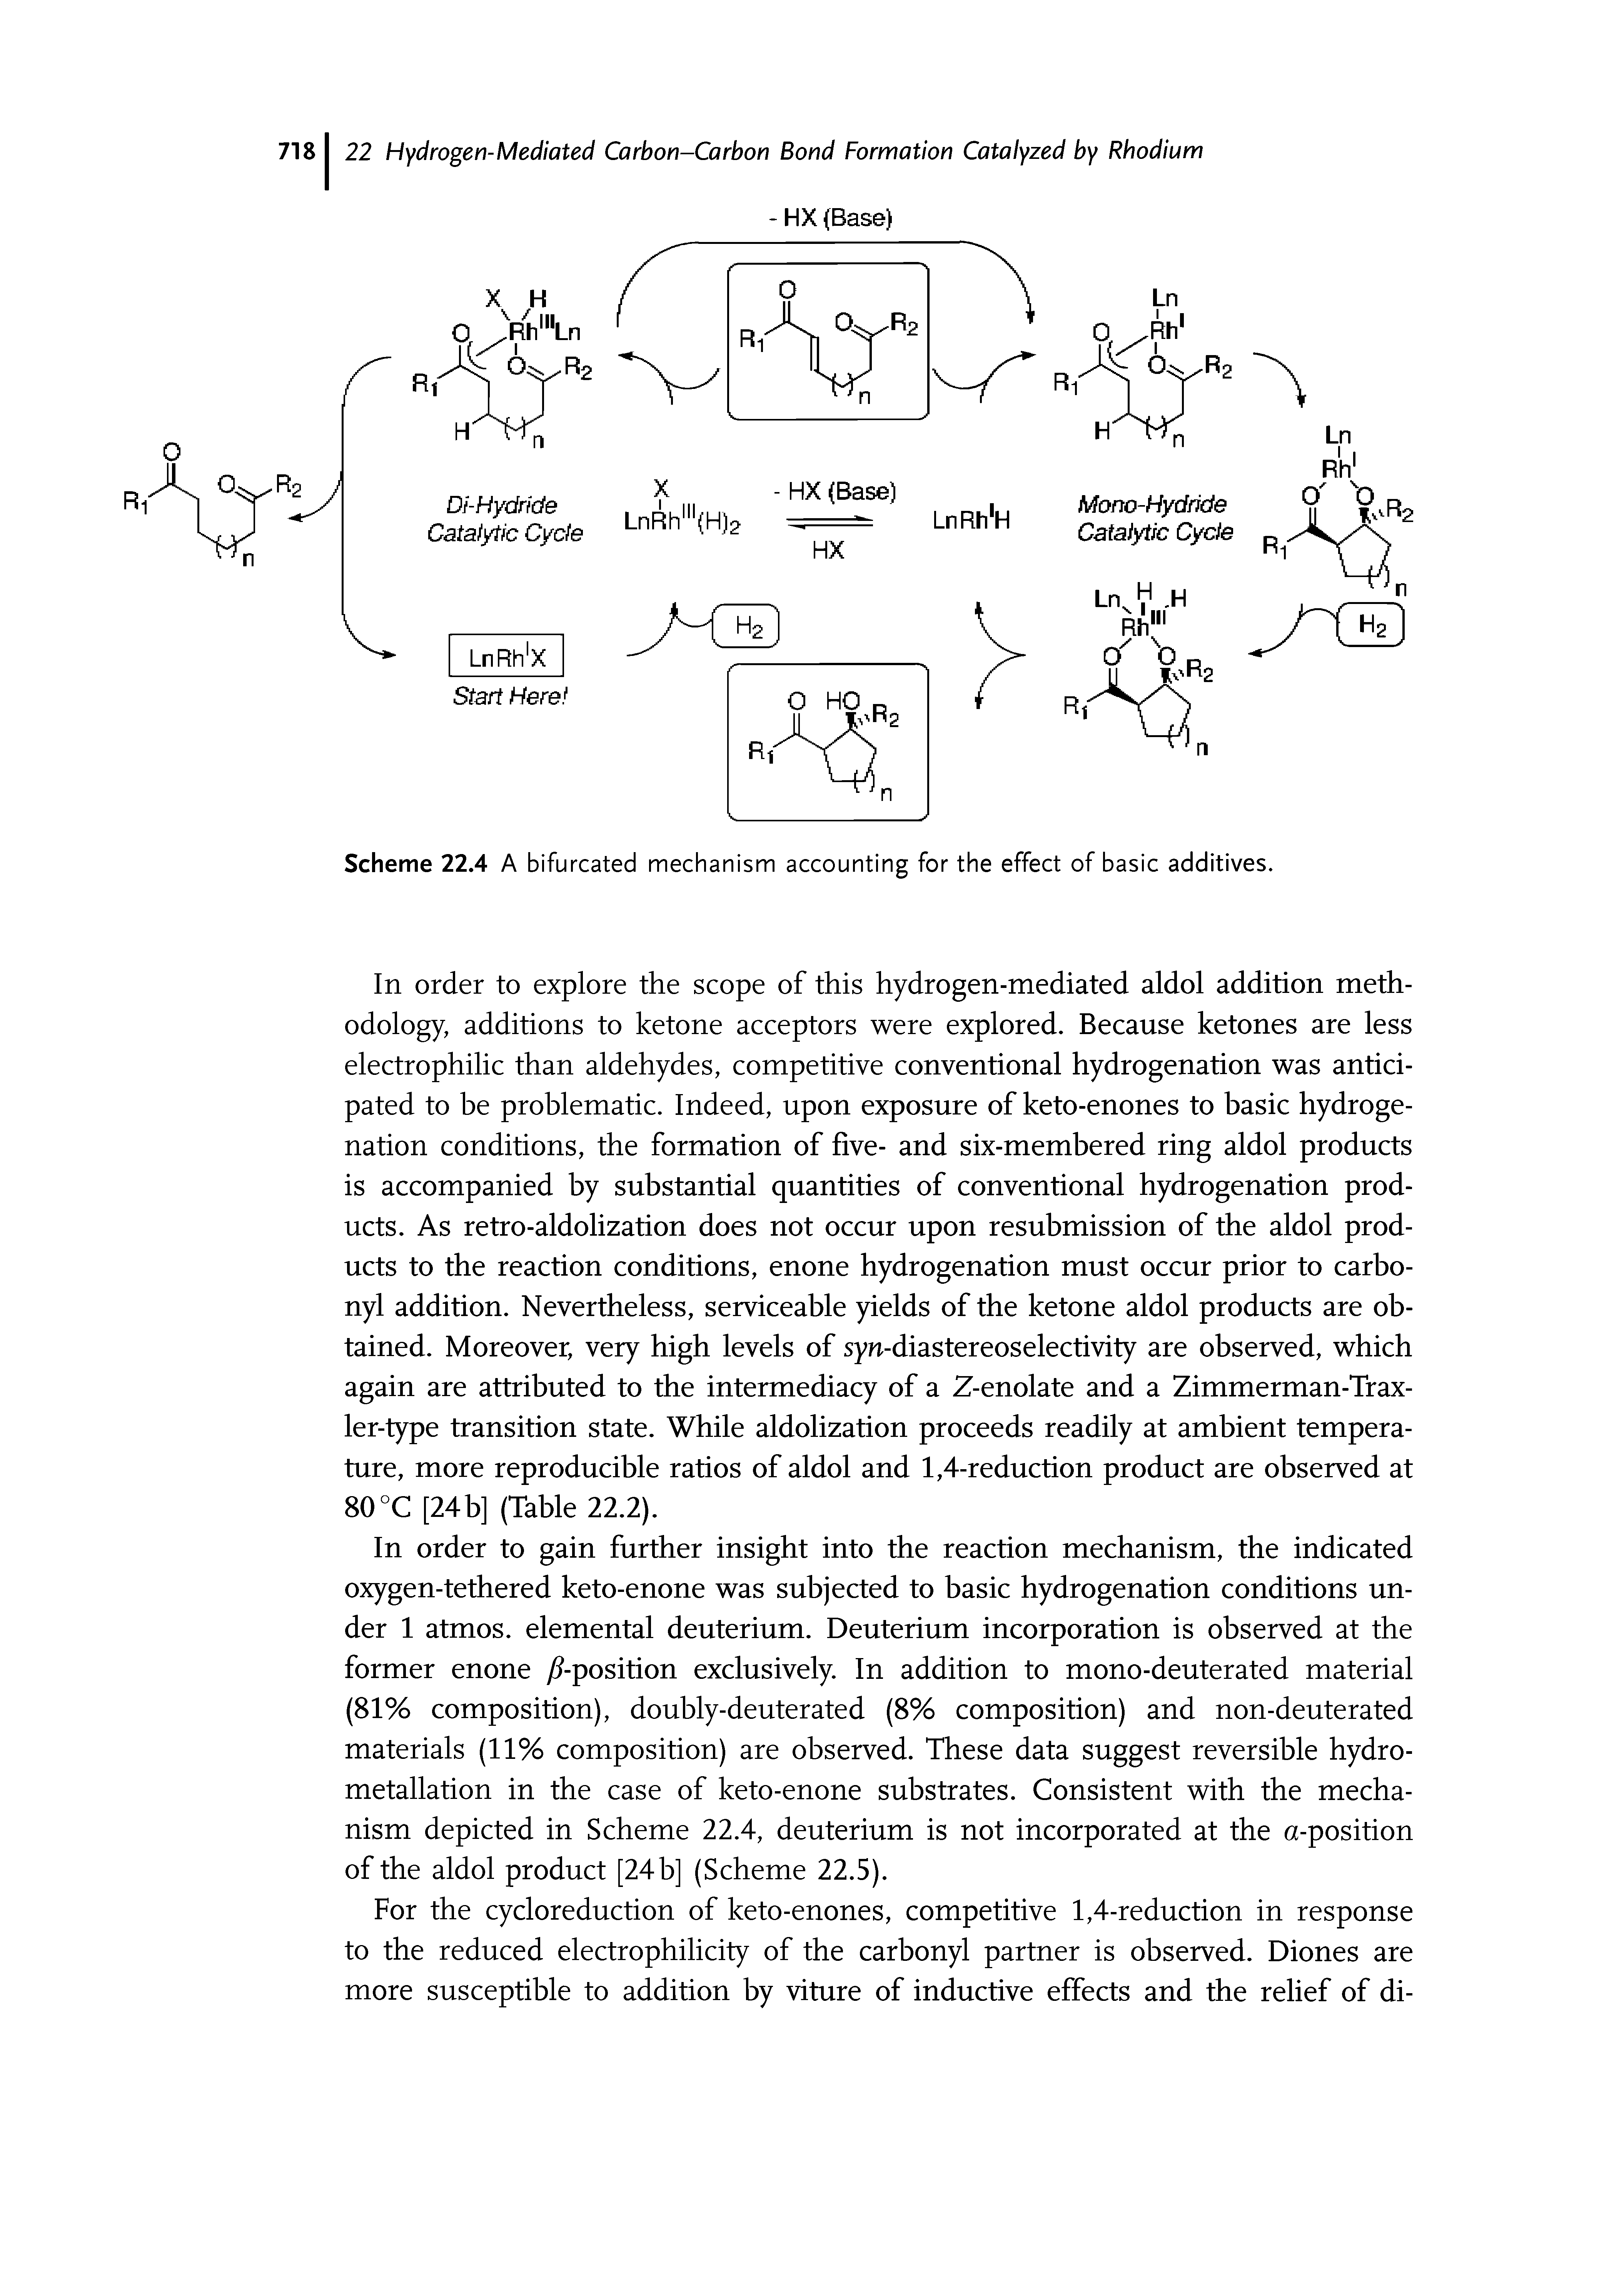 Scheme 22.4 A bifurcated mechanism accounting for the effect of basic additives.